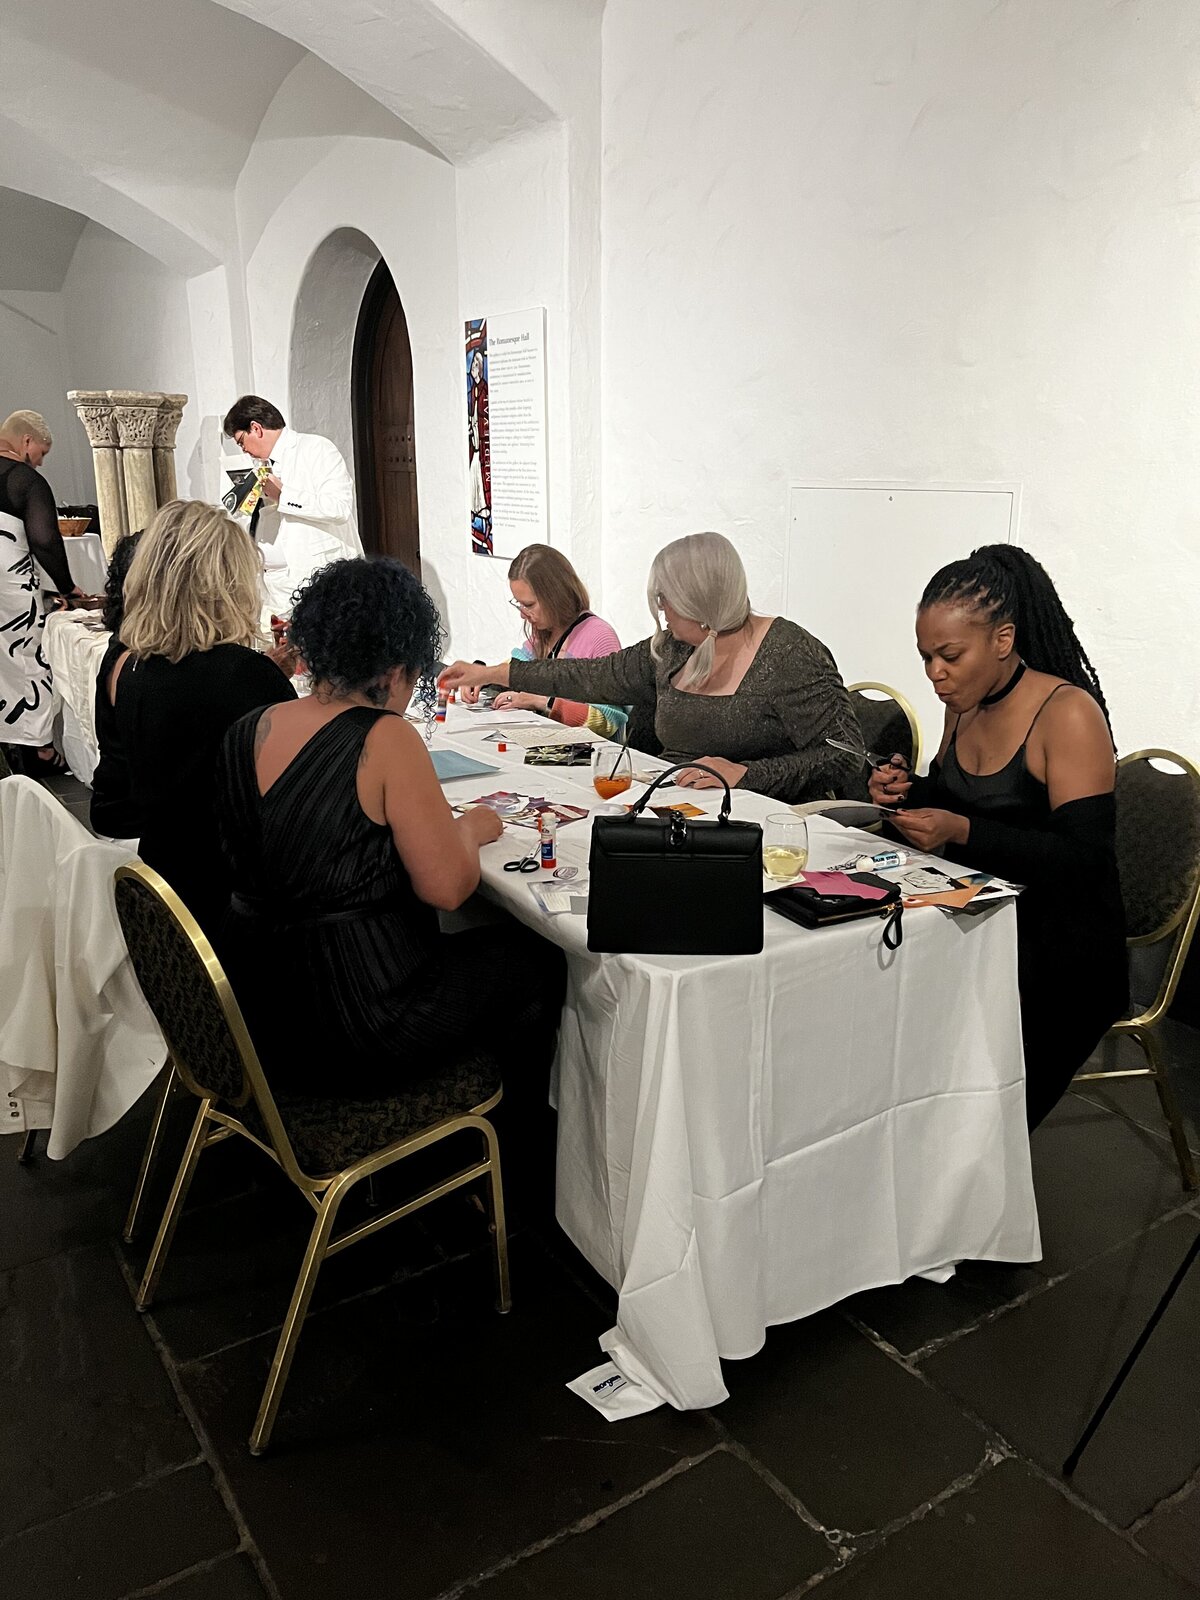 People sitting at a table, cutting, gluing, and arranging images for their collages